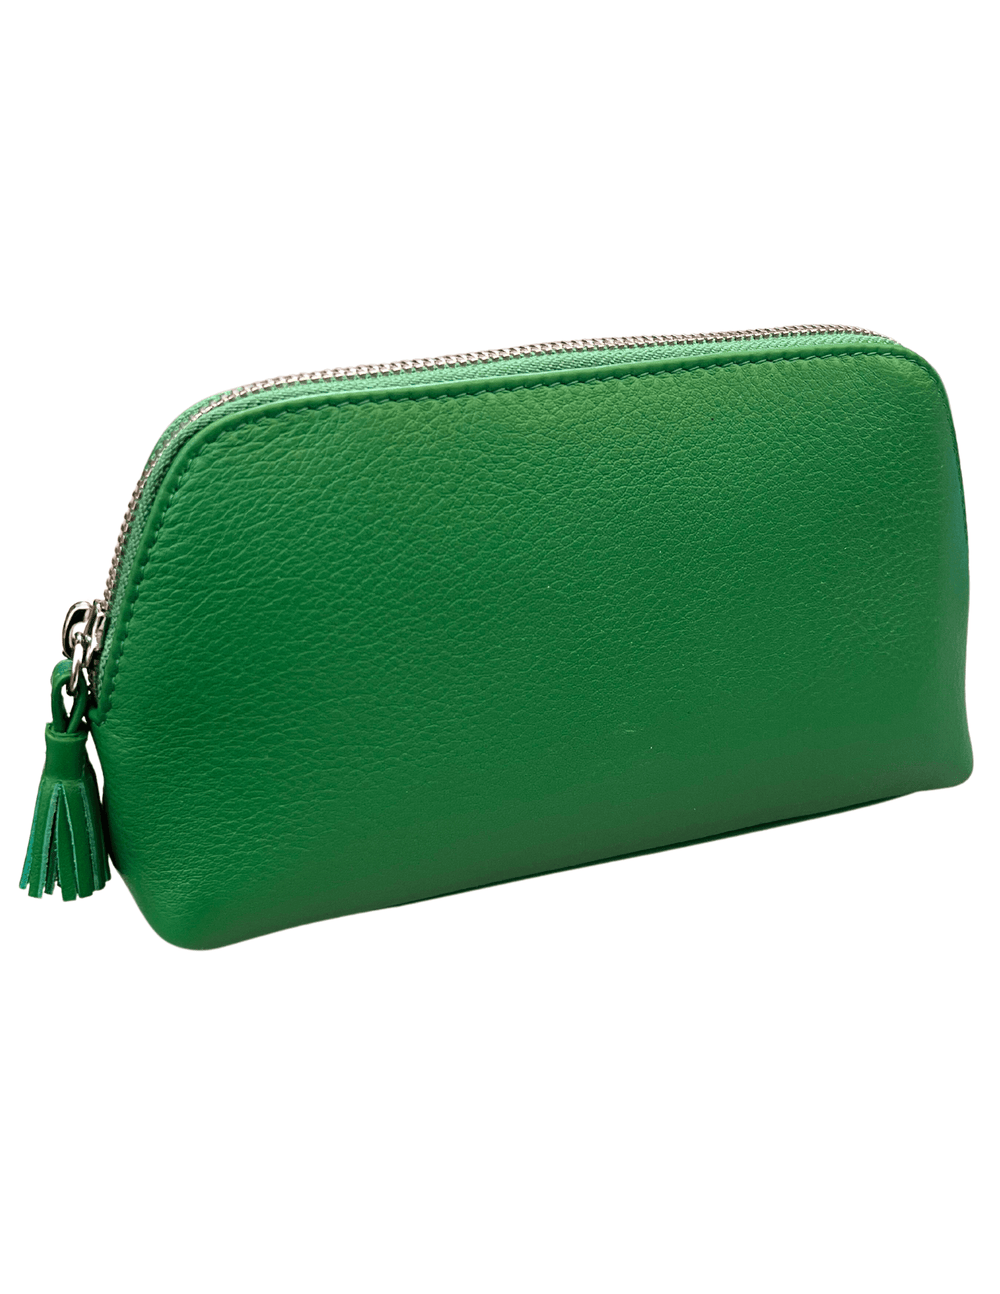 Emerald green leather large makeup pouch rfid blocking gift boutique near me